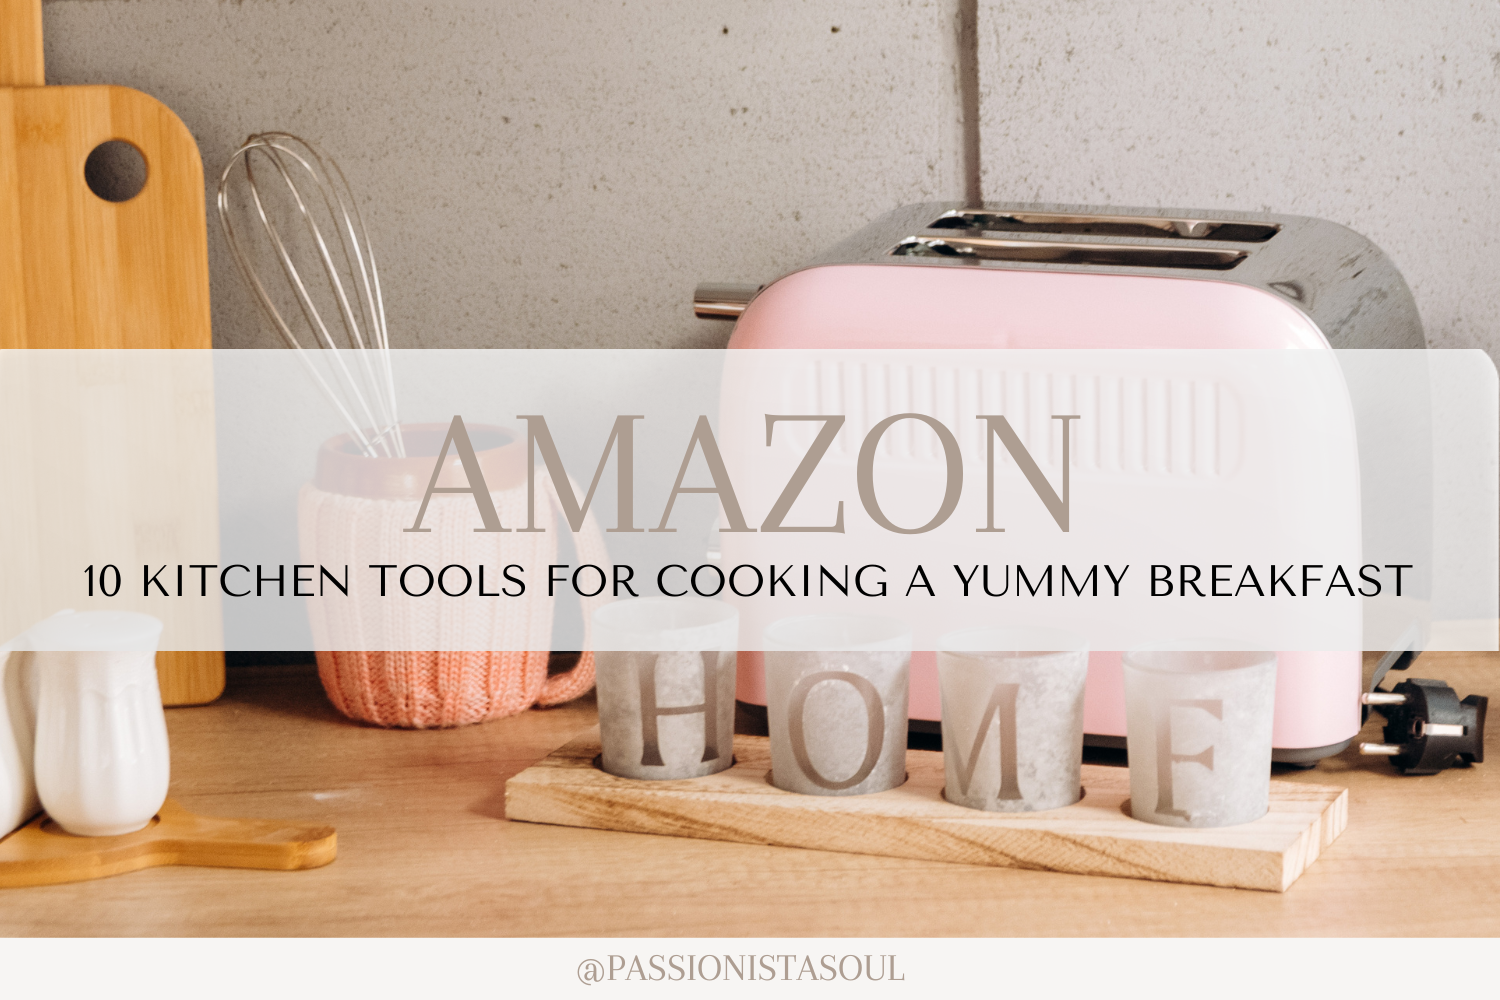 Favorite Kitchen Gadgets and Appliances - Tiffy Cooks